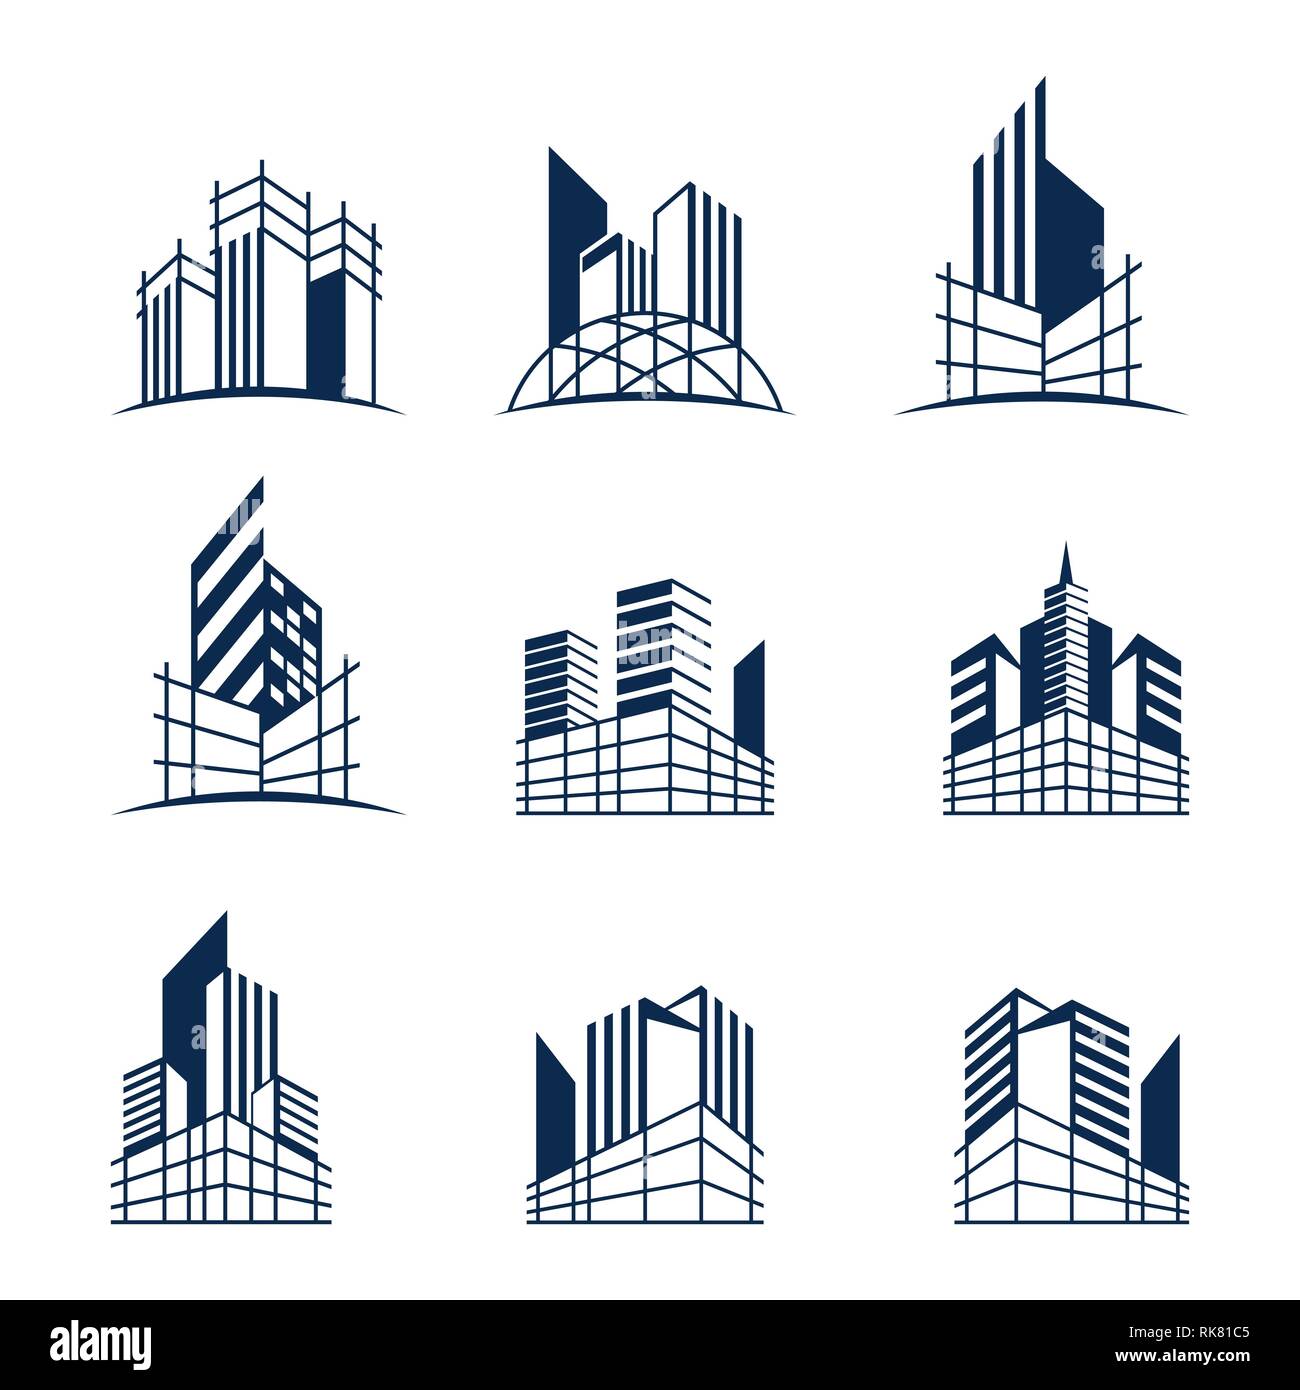 Building construction logo bundle, Various forms and models of buildings with scaffolding, suitable for construction or real estate logos. Stock Photo